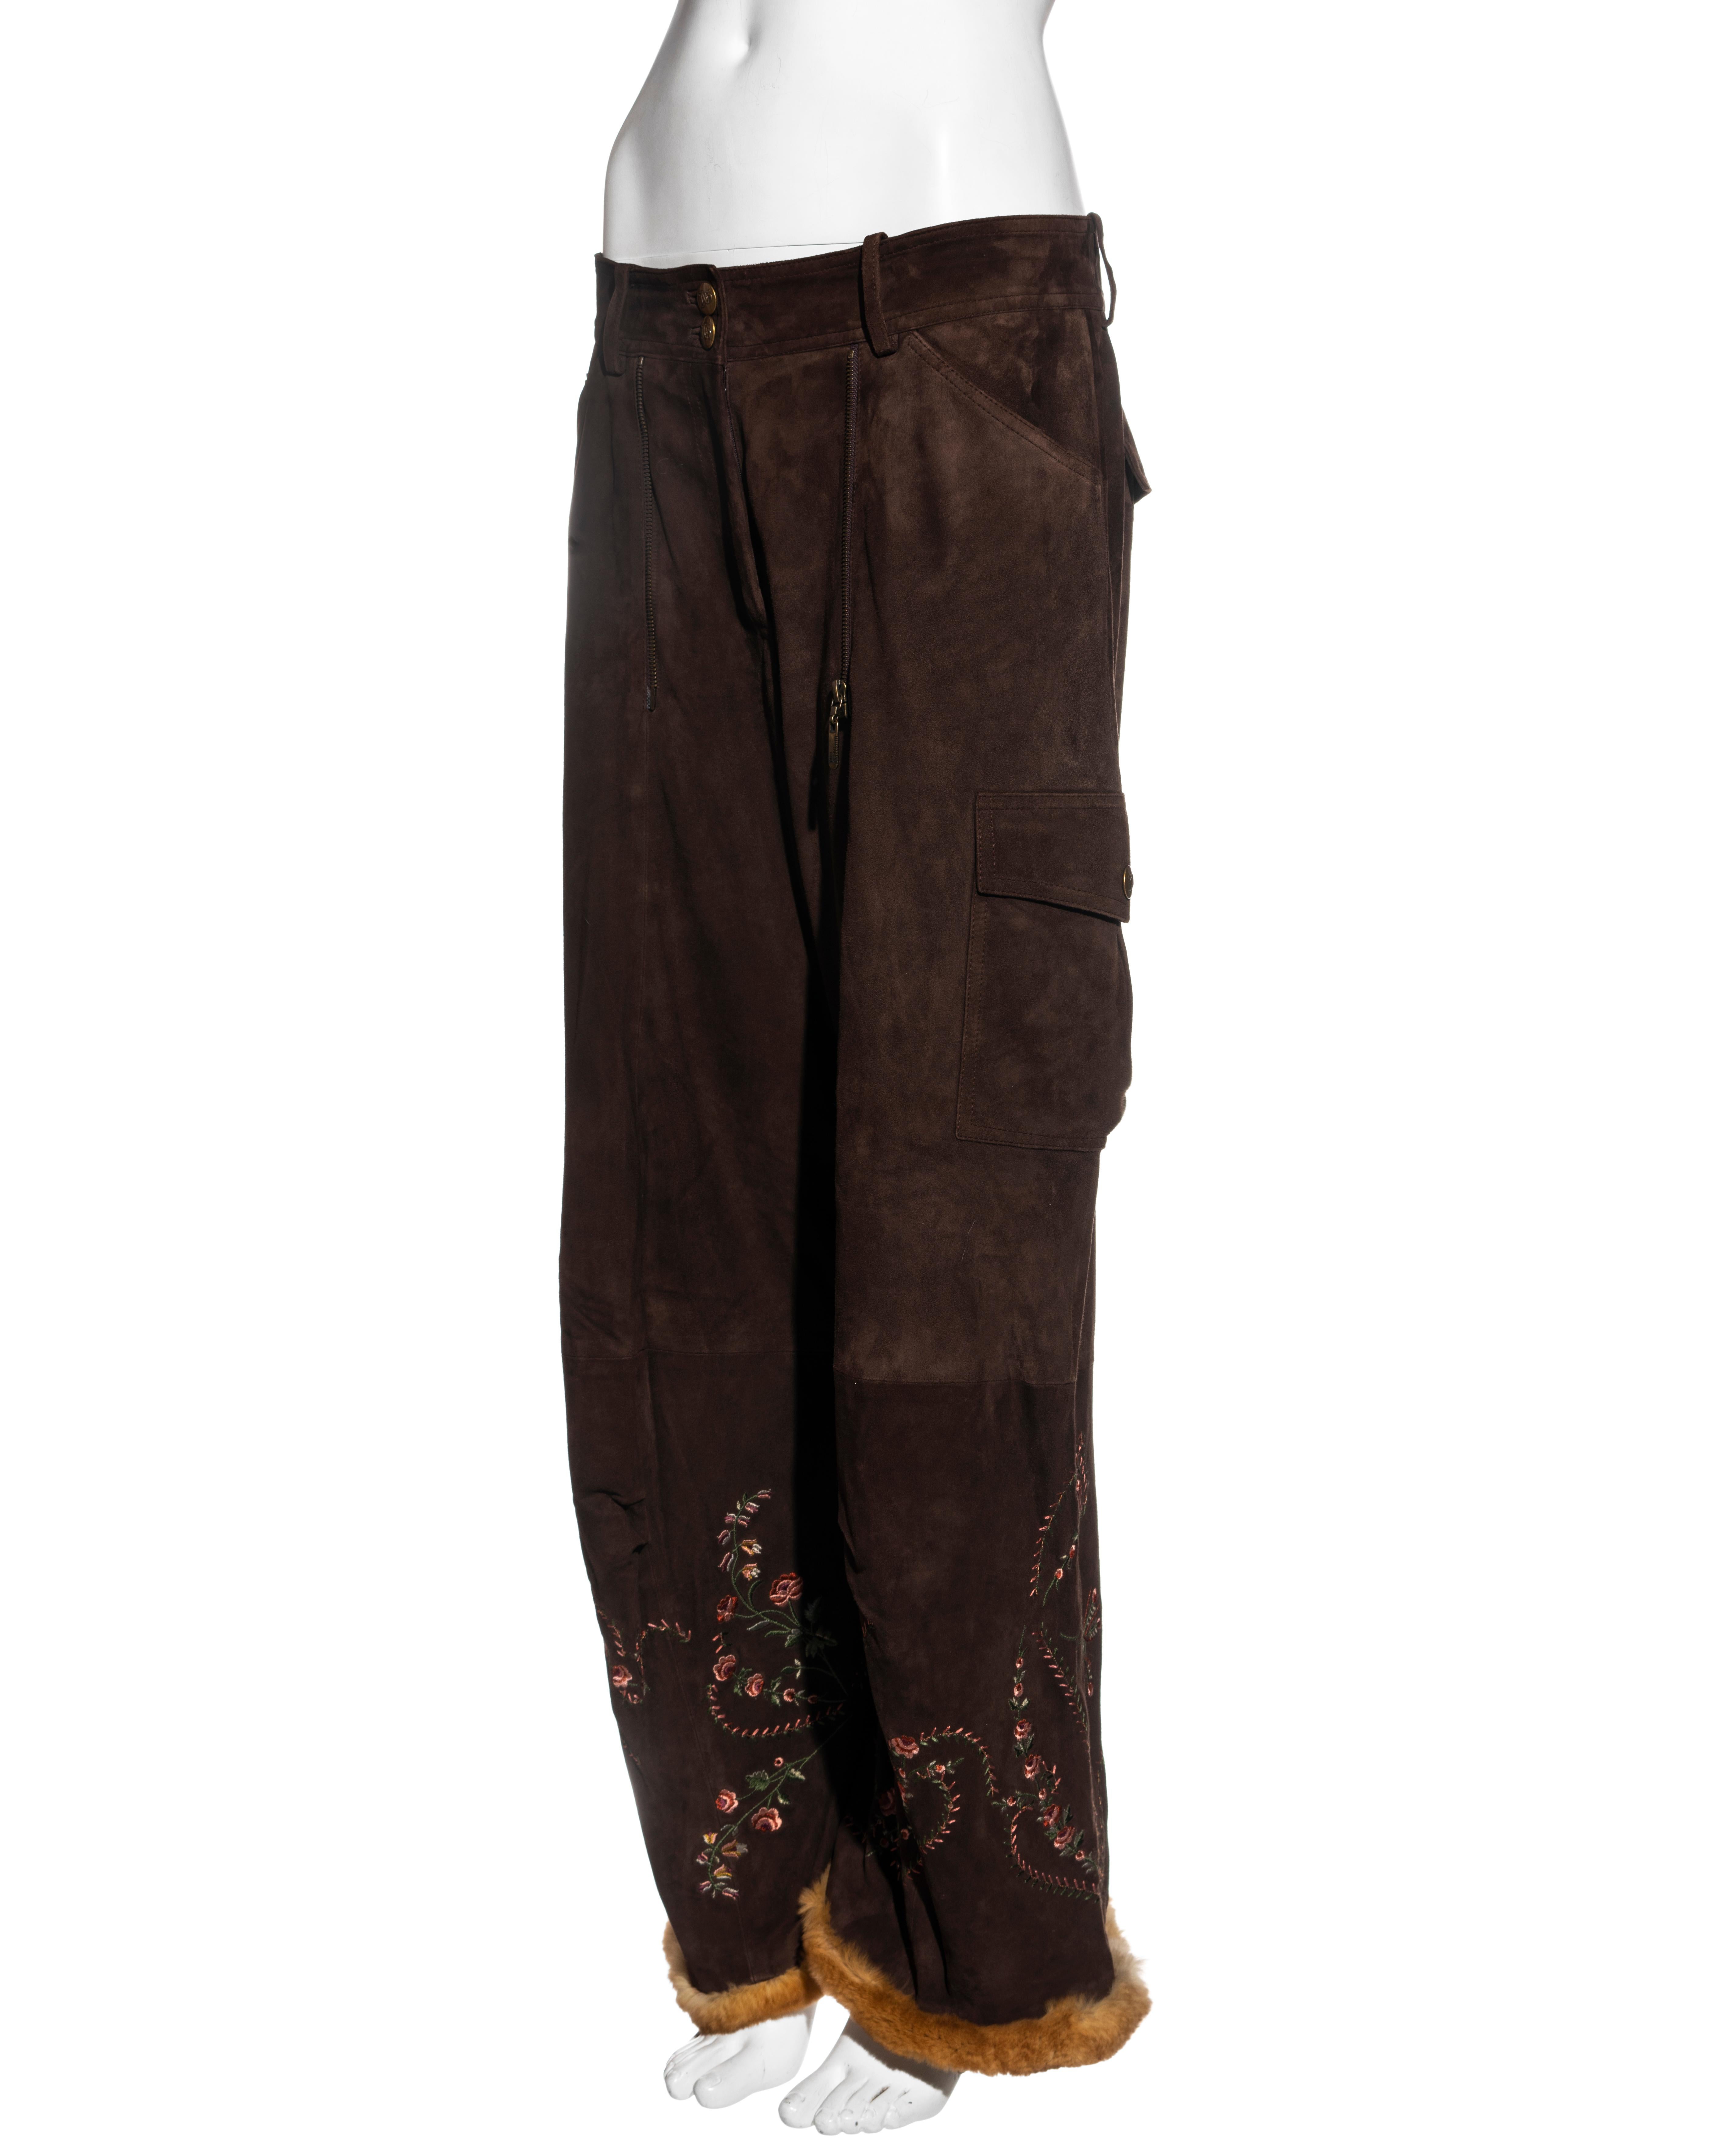 Black John Galliano brown embroidered suede cargo pants with fur trim, fw 2003